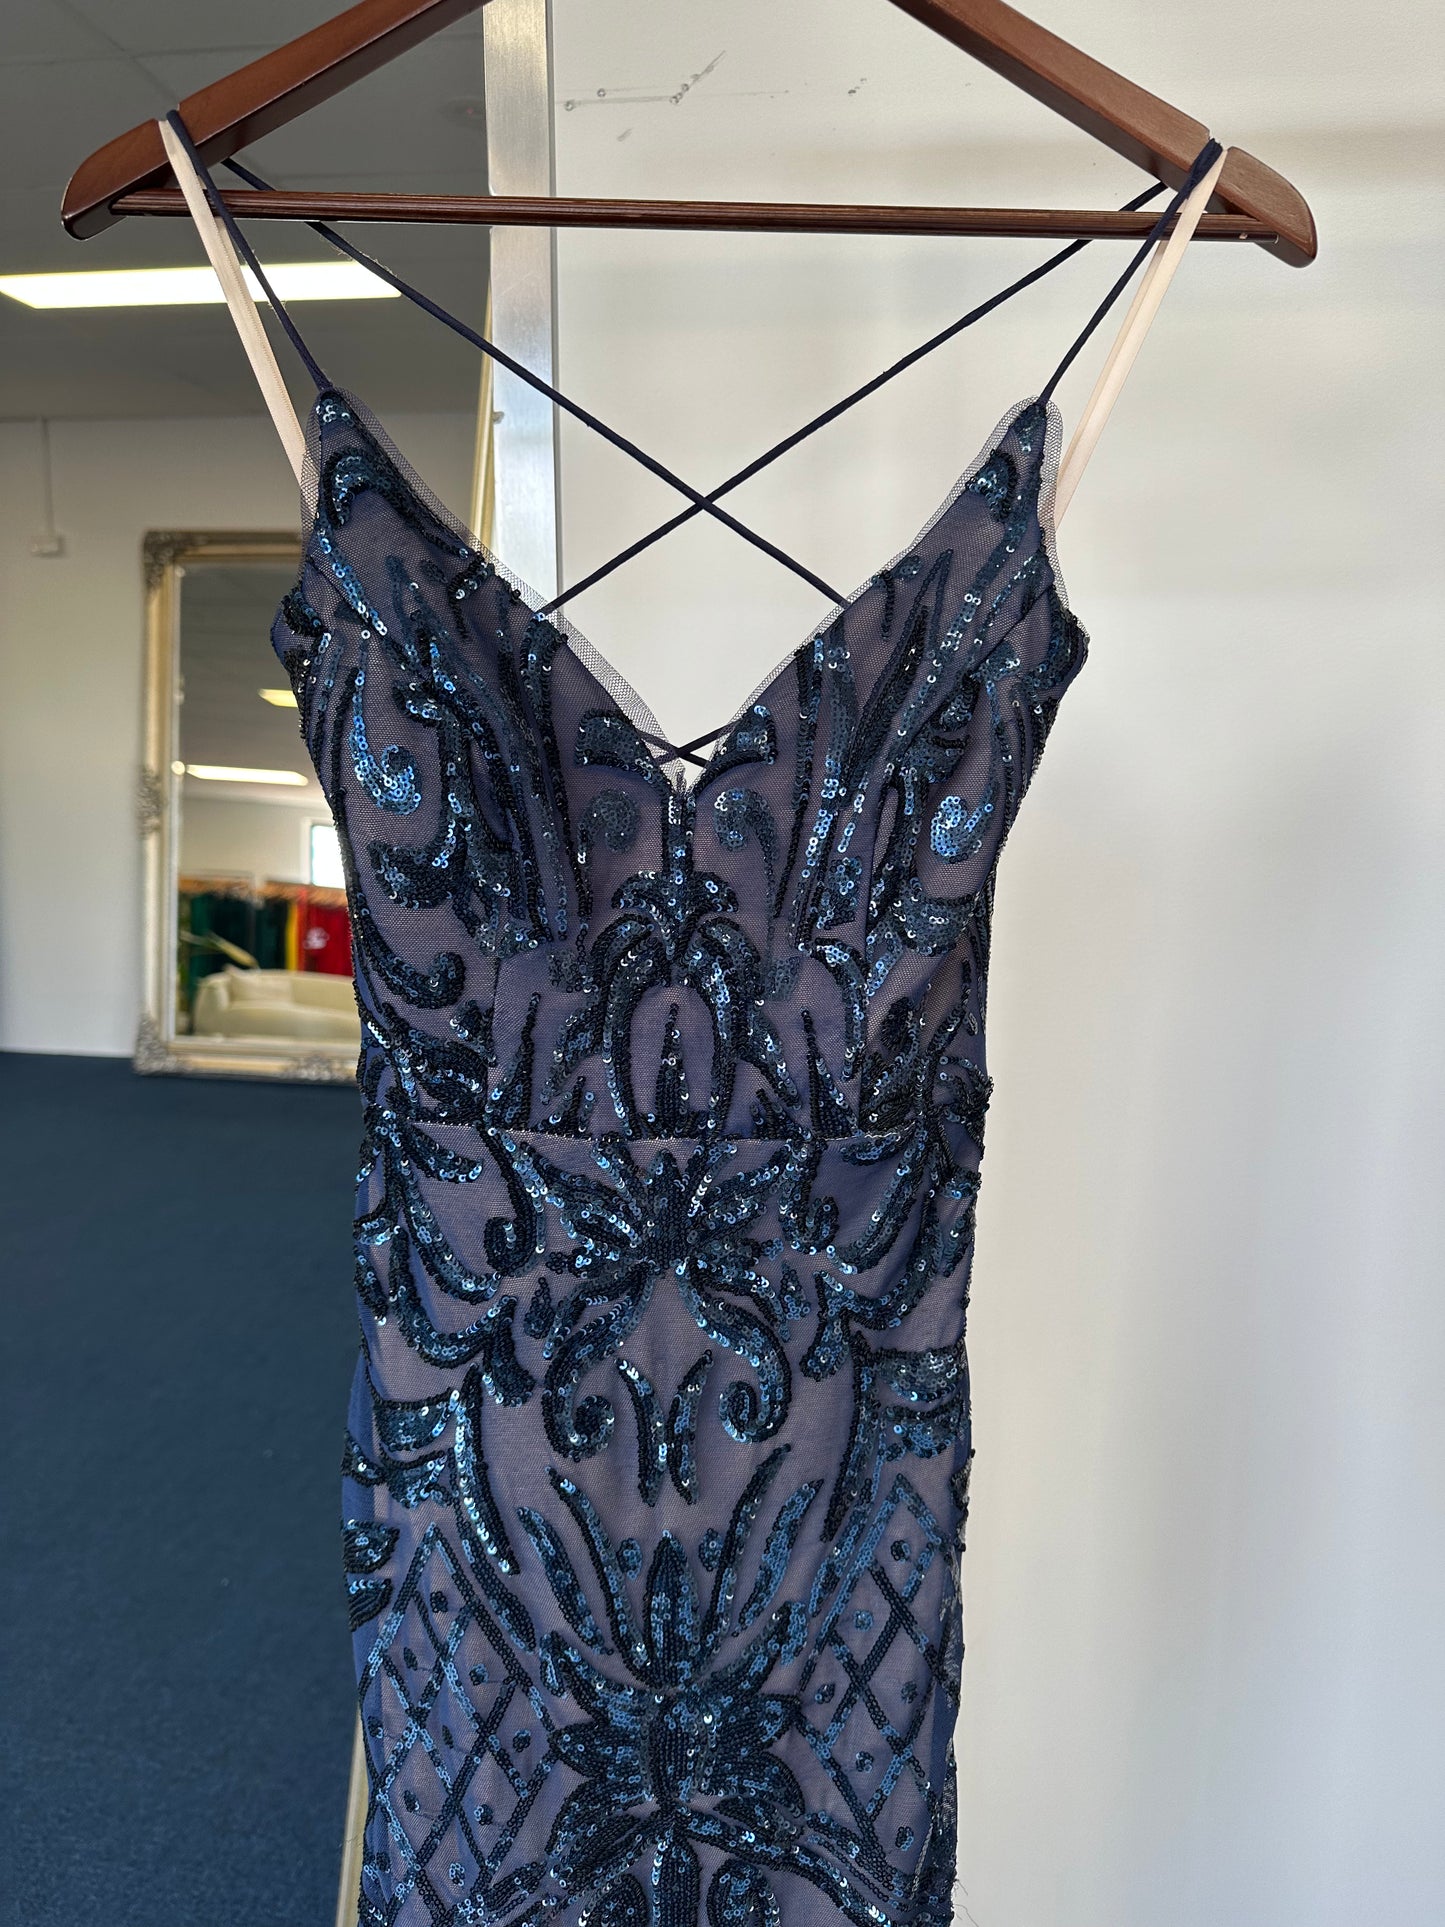 Bariano Sequin Strappy Gown Navy